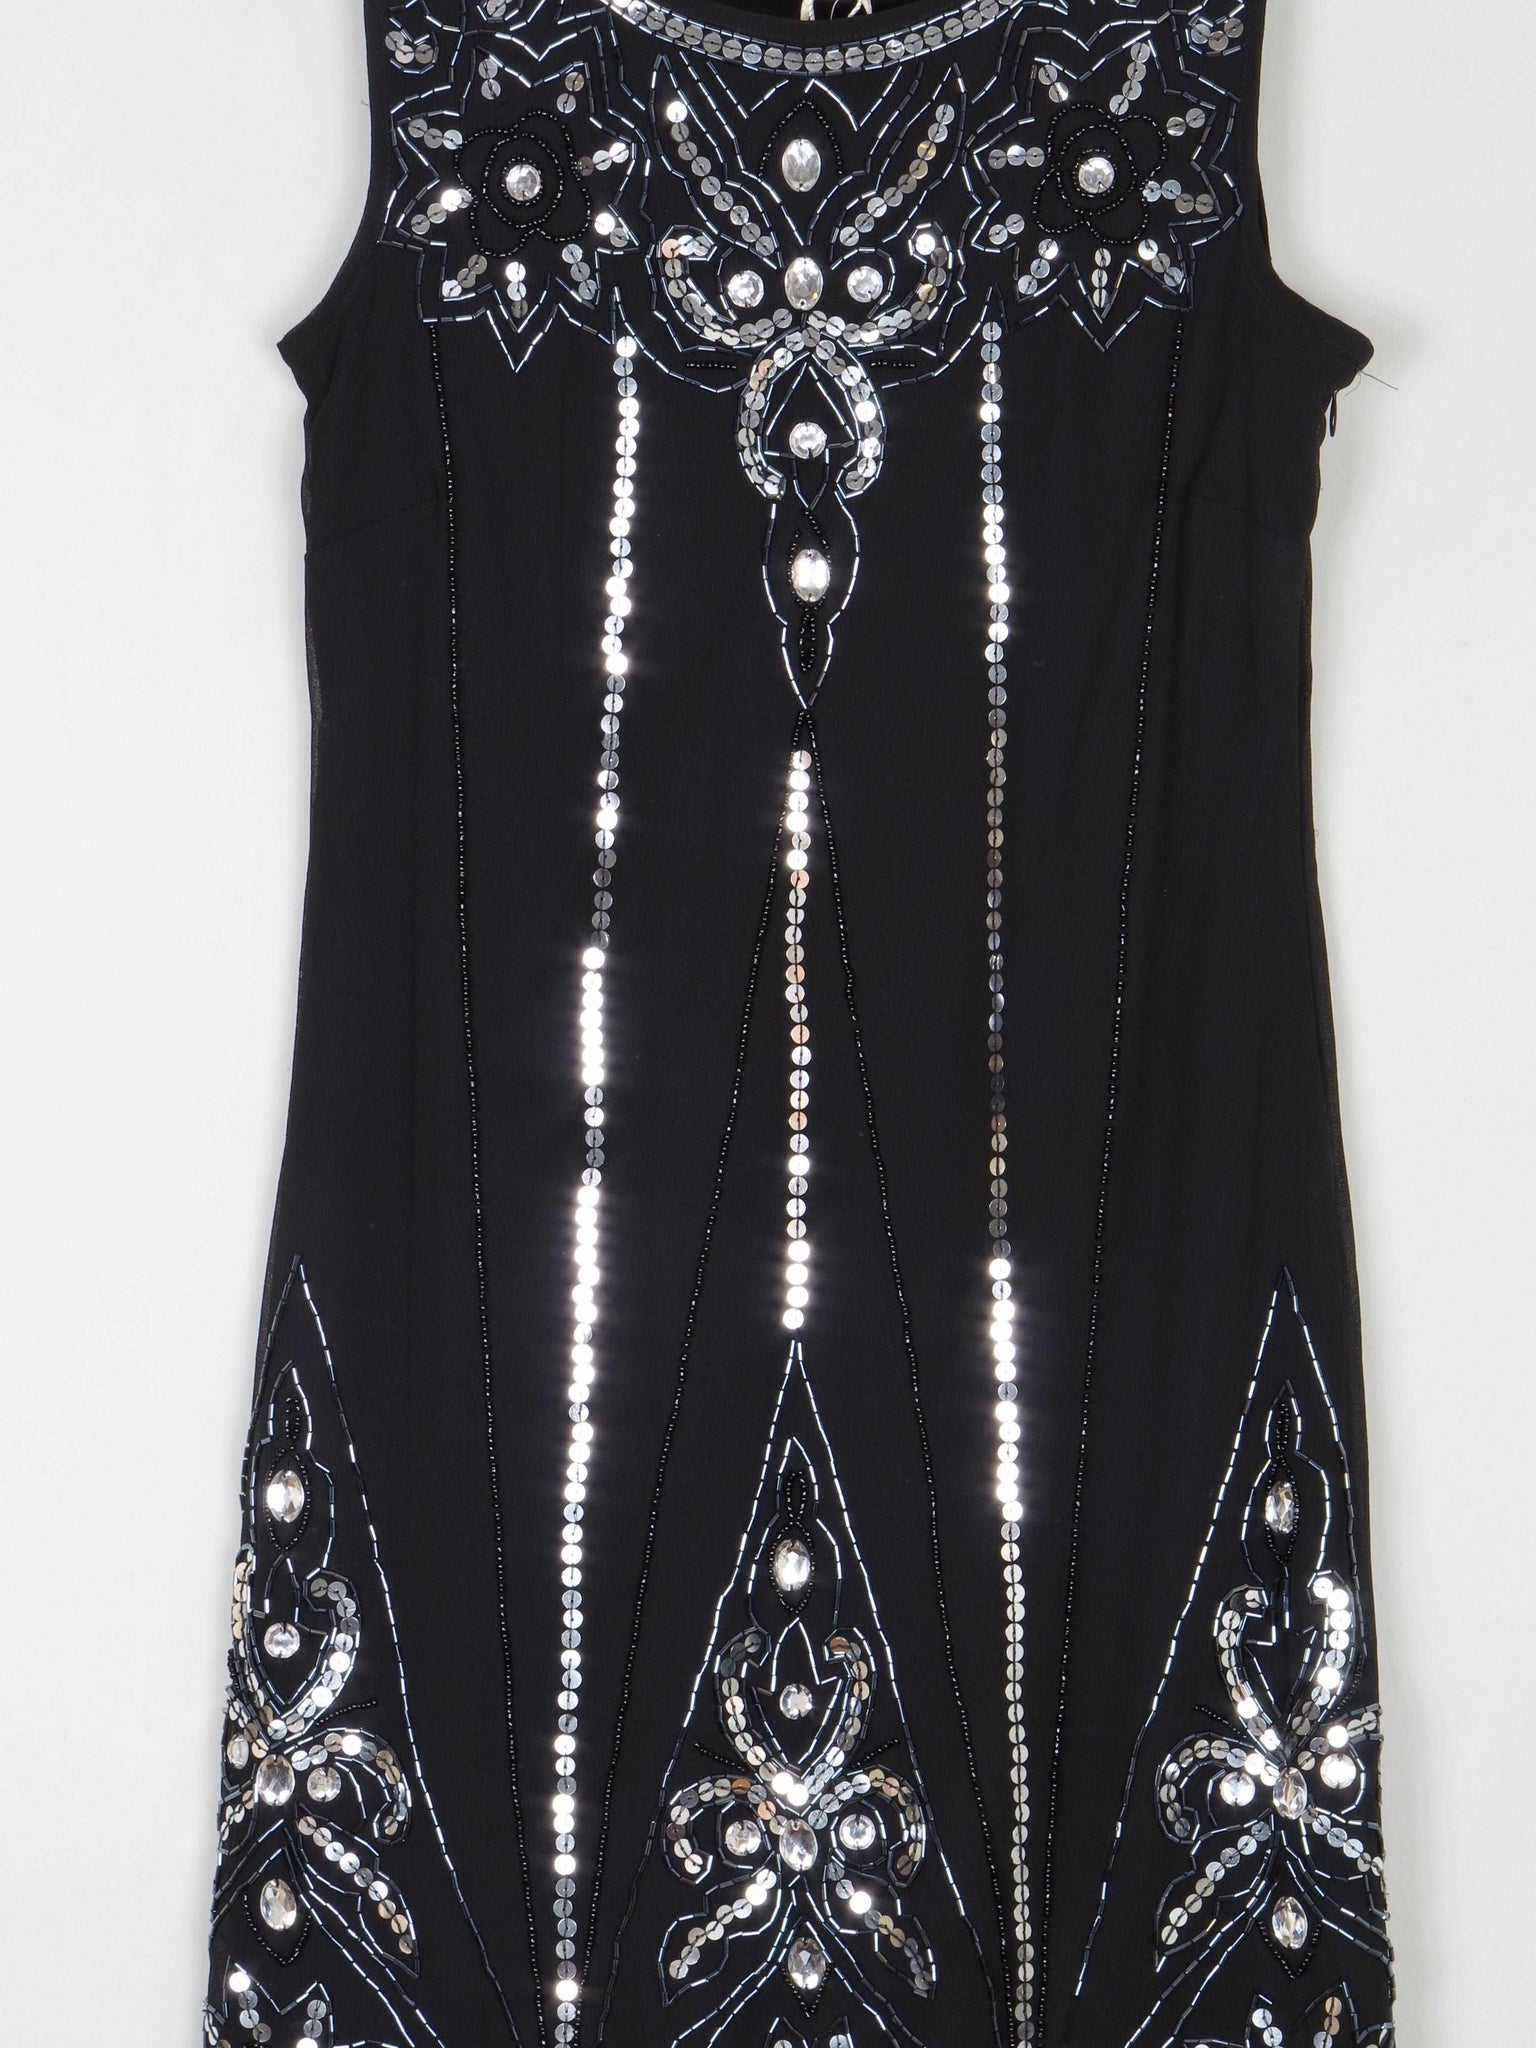 Black 1920s Style Flapper Dress With Beads - The Harlequin